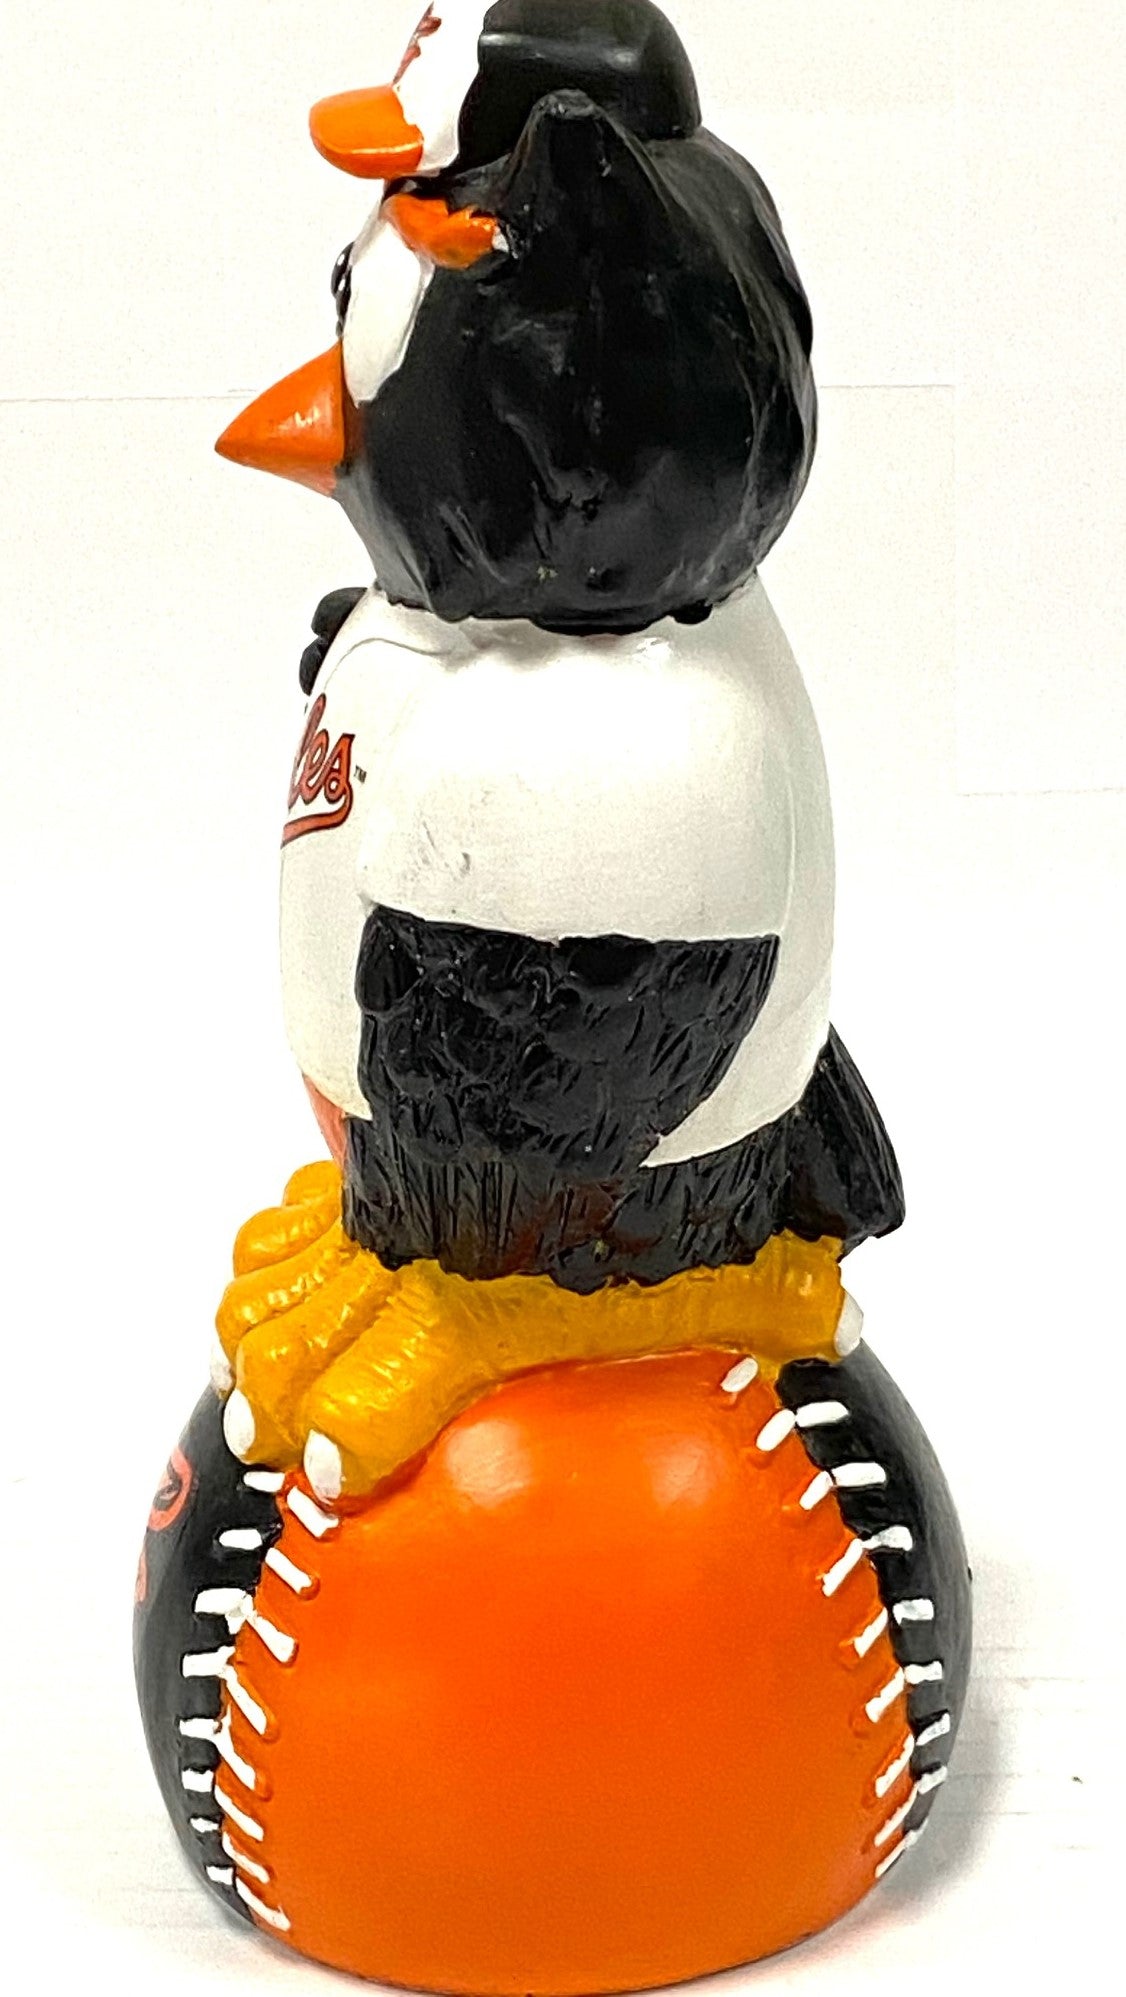 Baltimore Orioles 2013 MLB Resin Mascot Perched on Ball Team Beans (Used) by Forever Collectibles